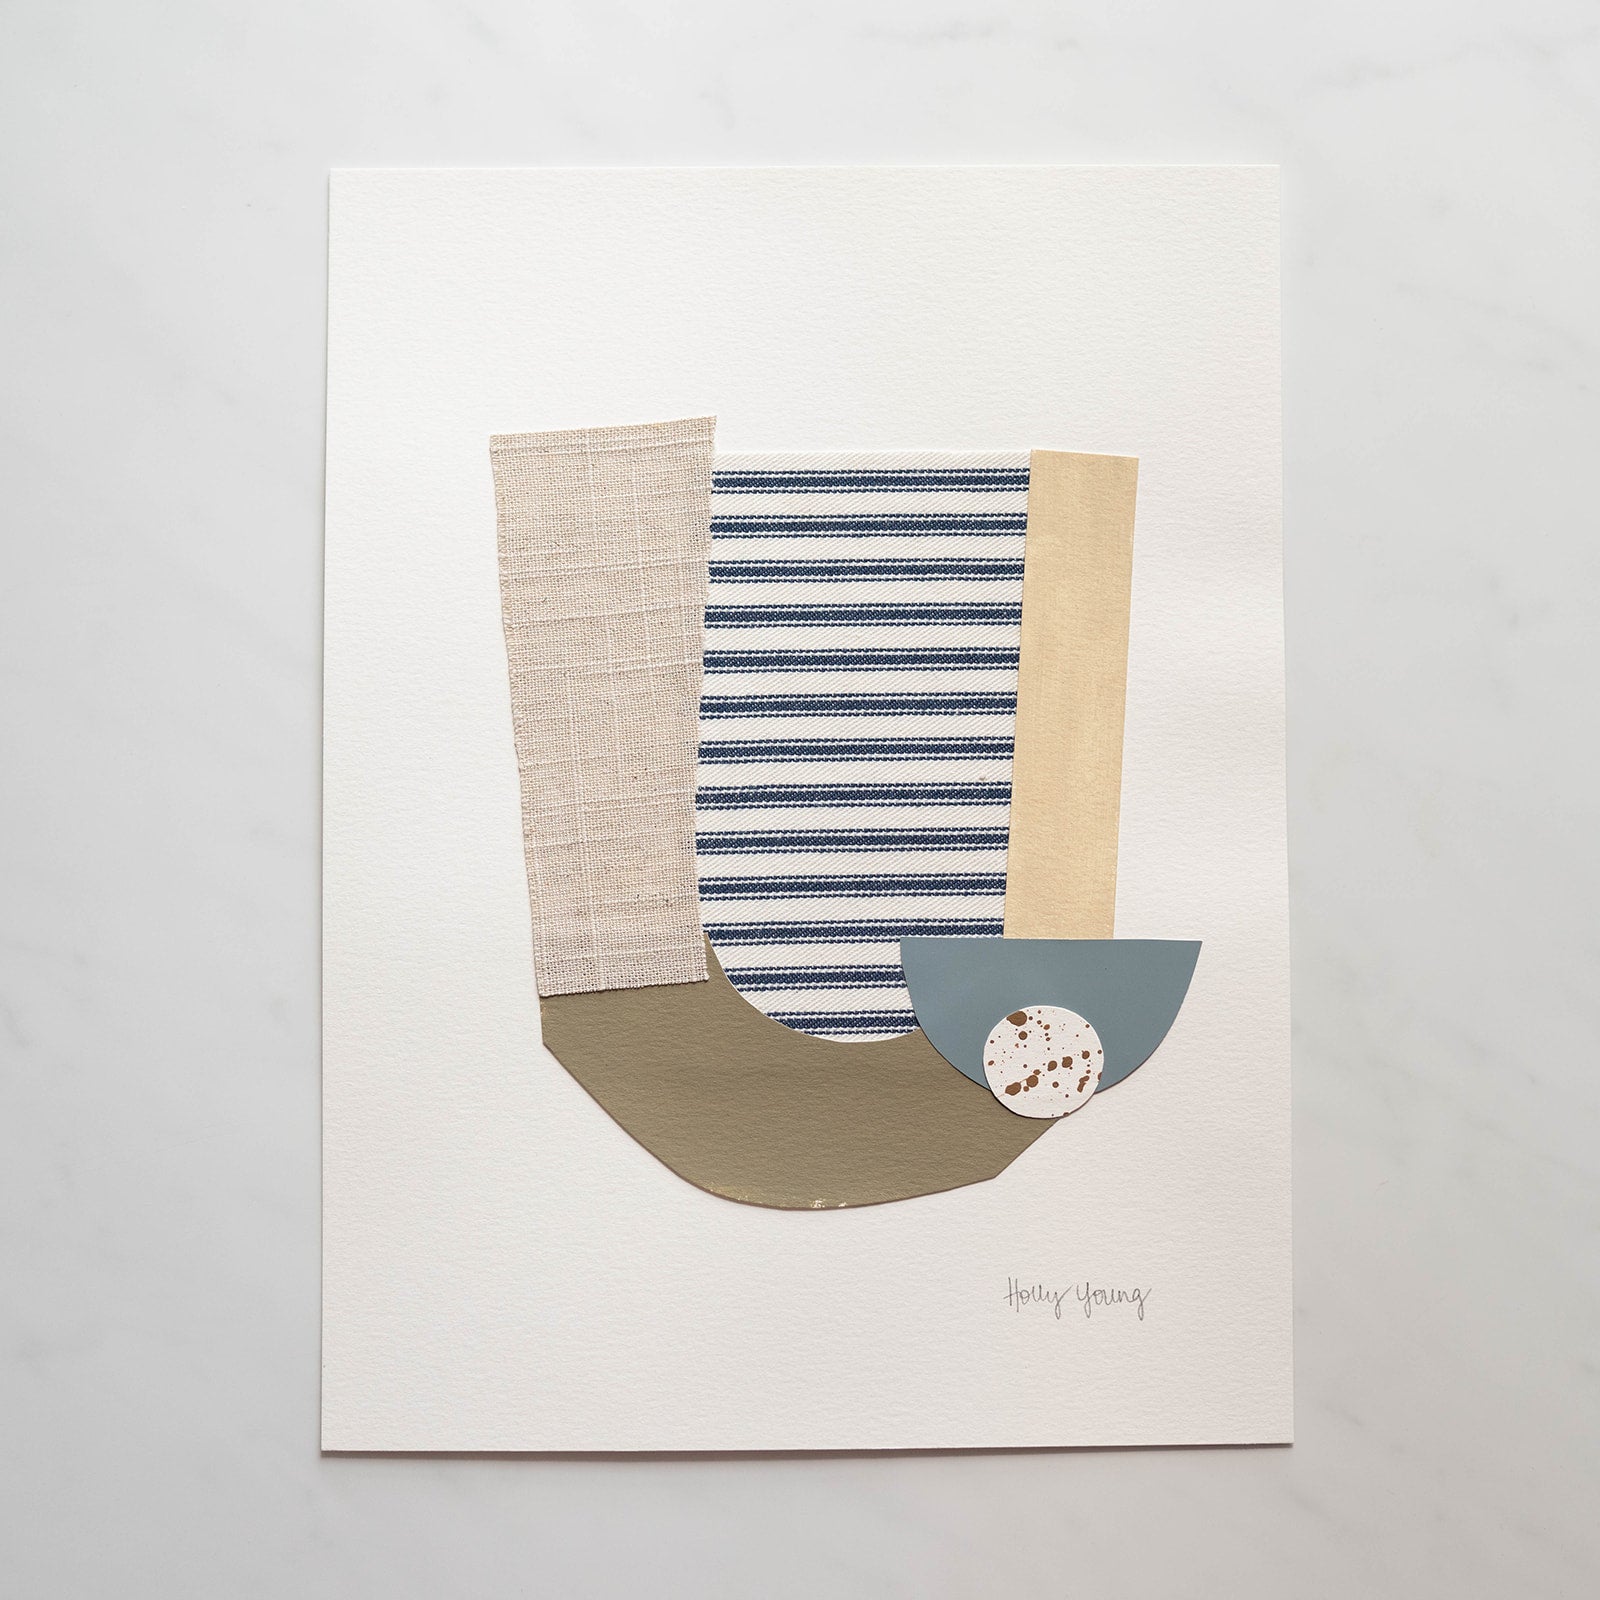 "Original Collage No.4" by Holly Young - Rug & Weave